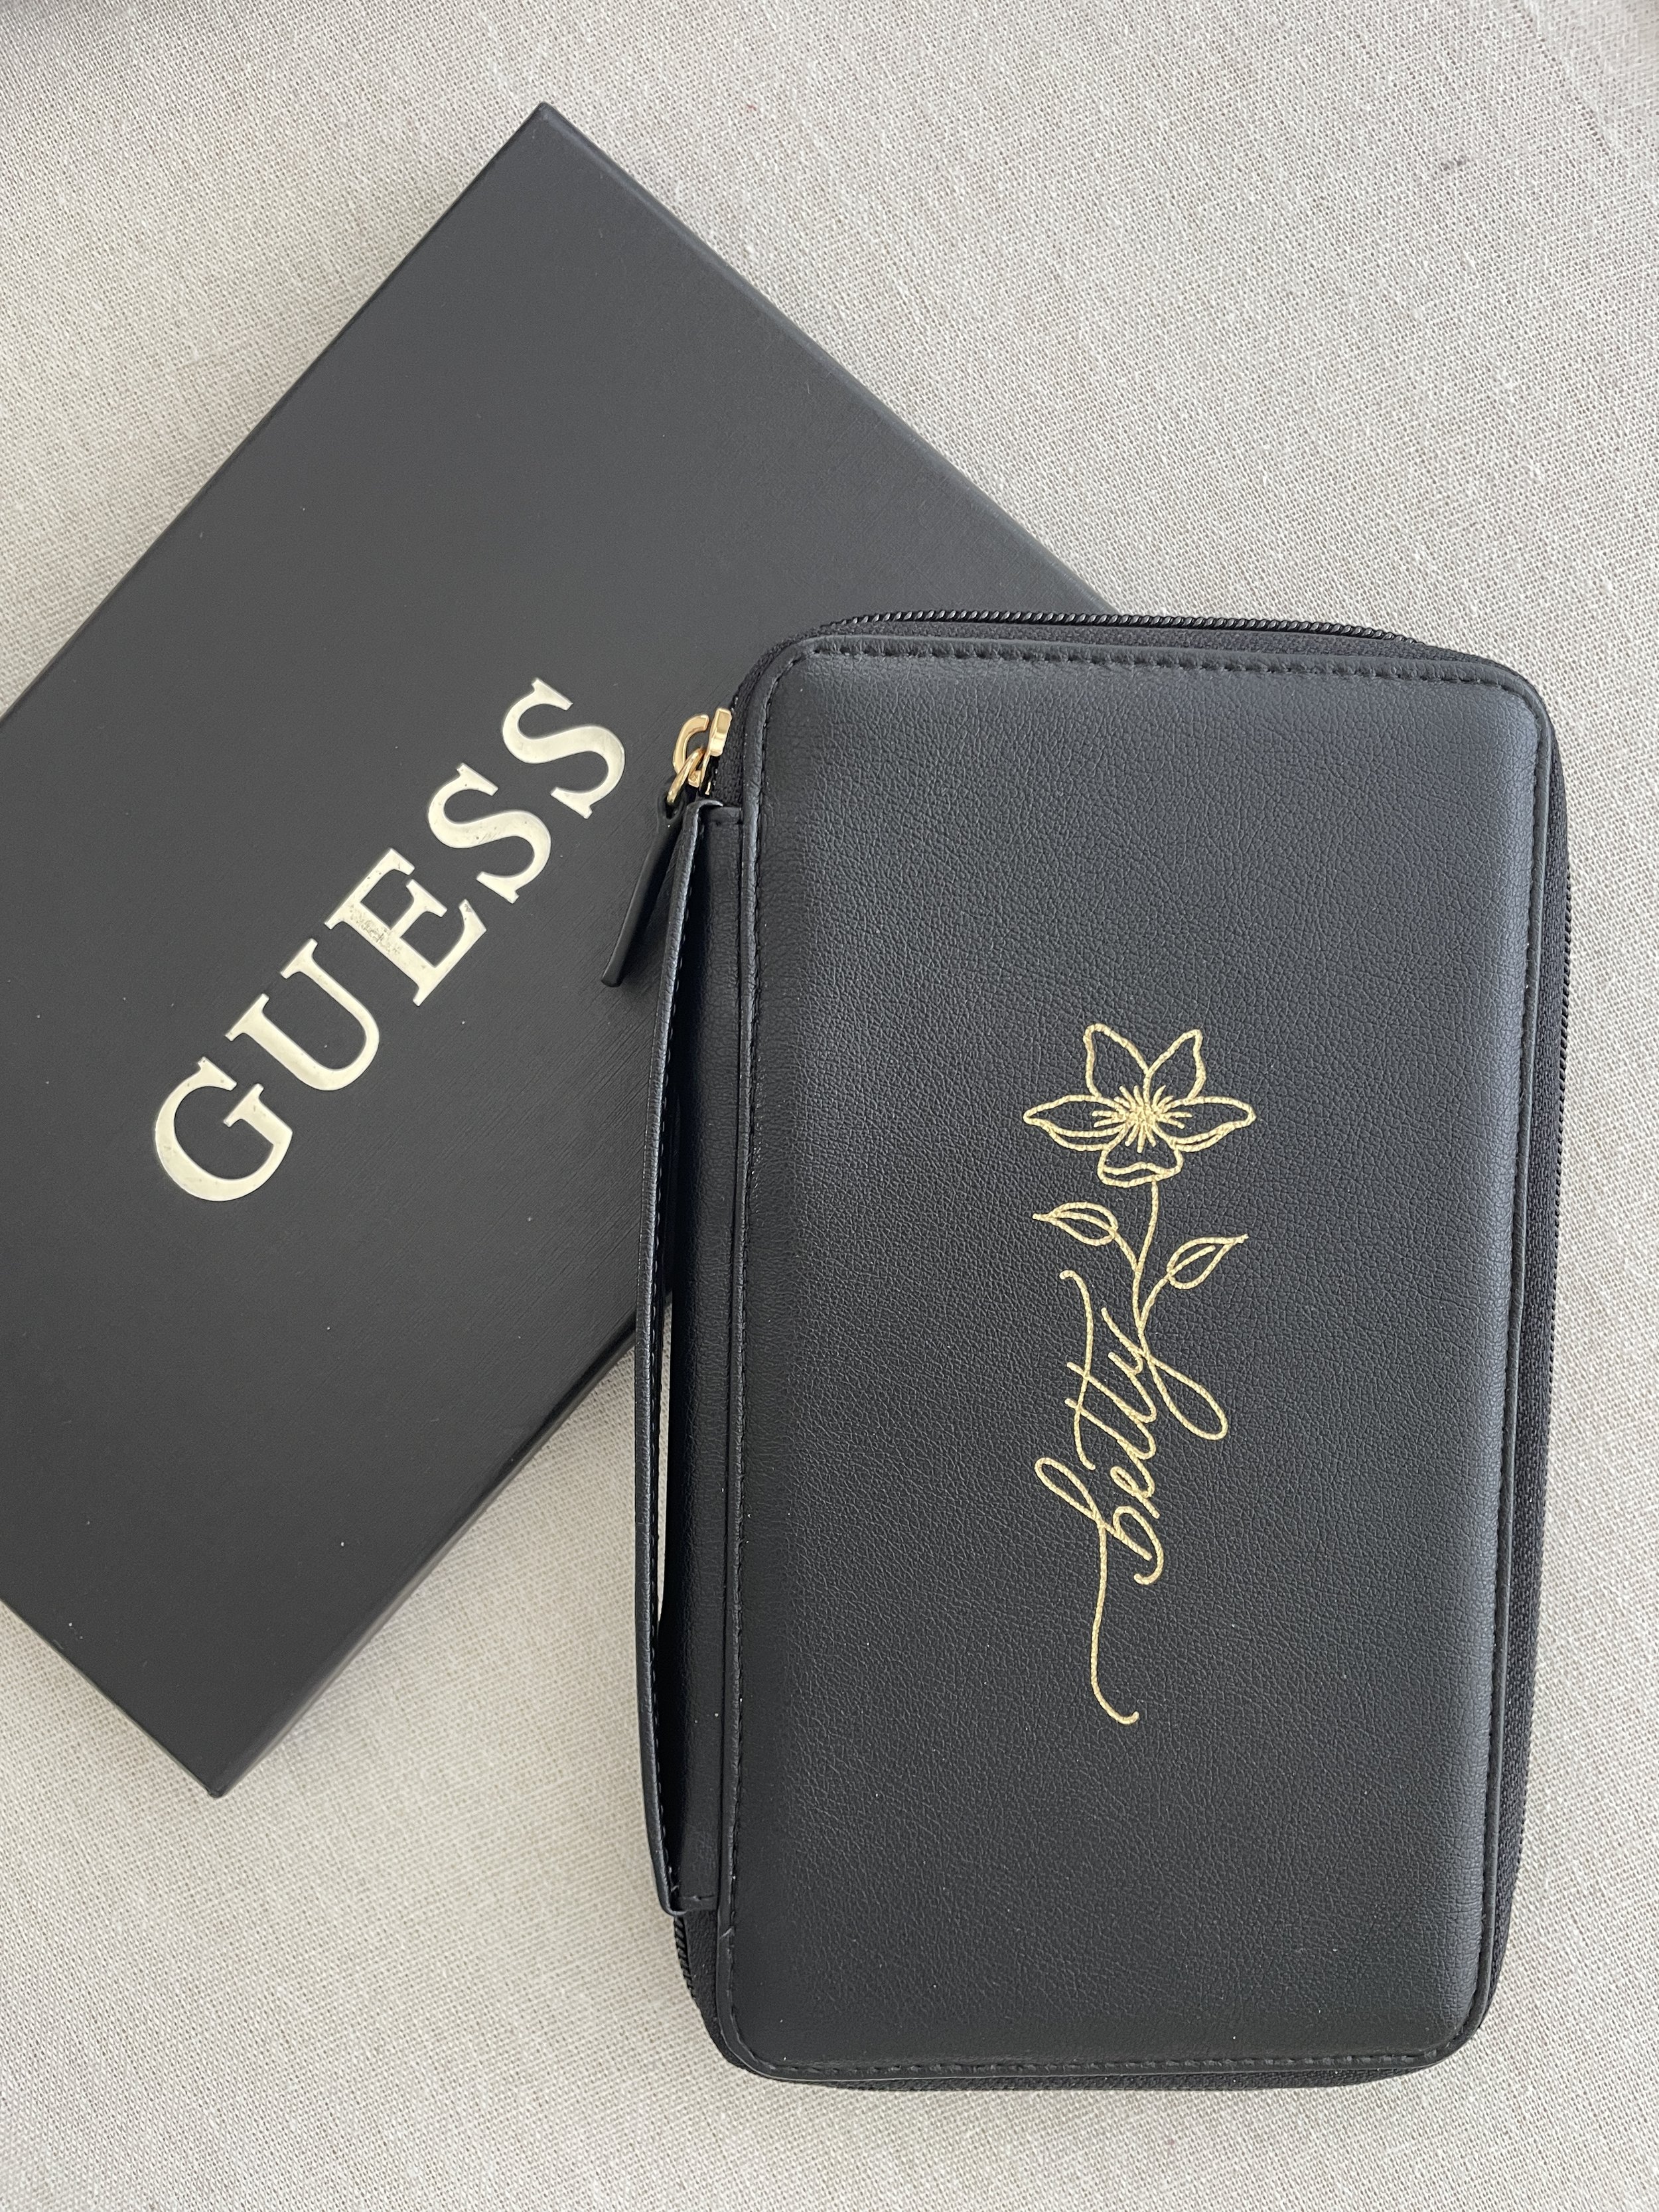 Travel Wallet Event with Guess (Las Vegas)